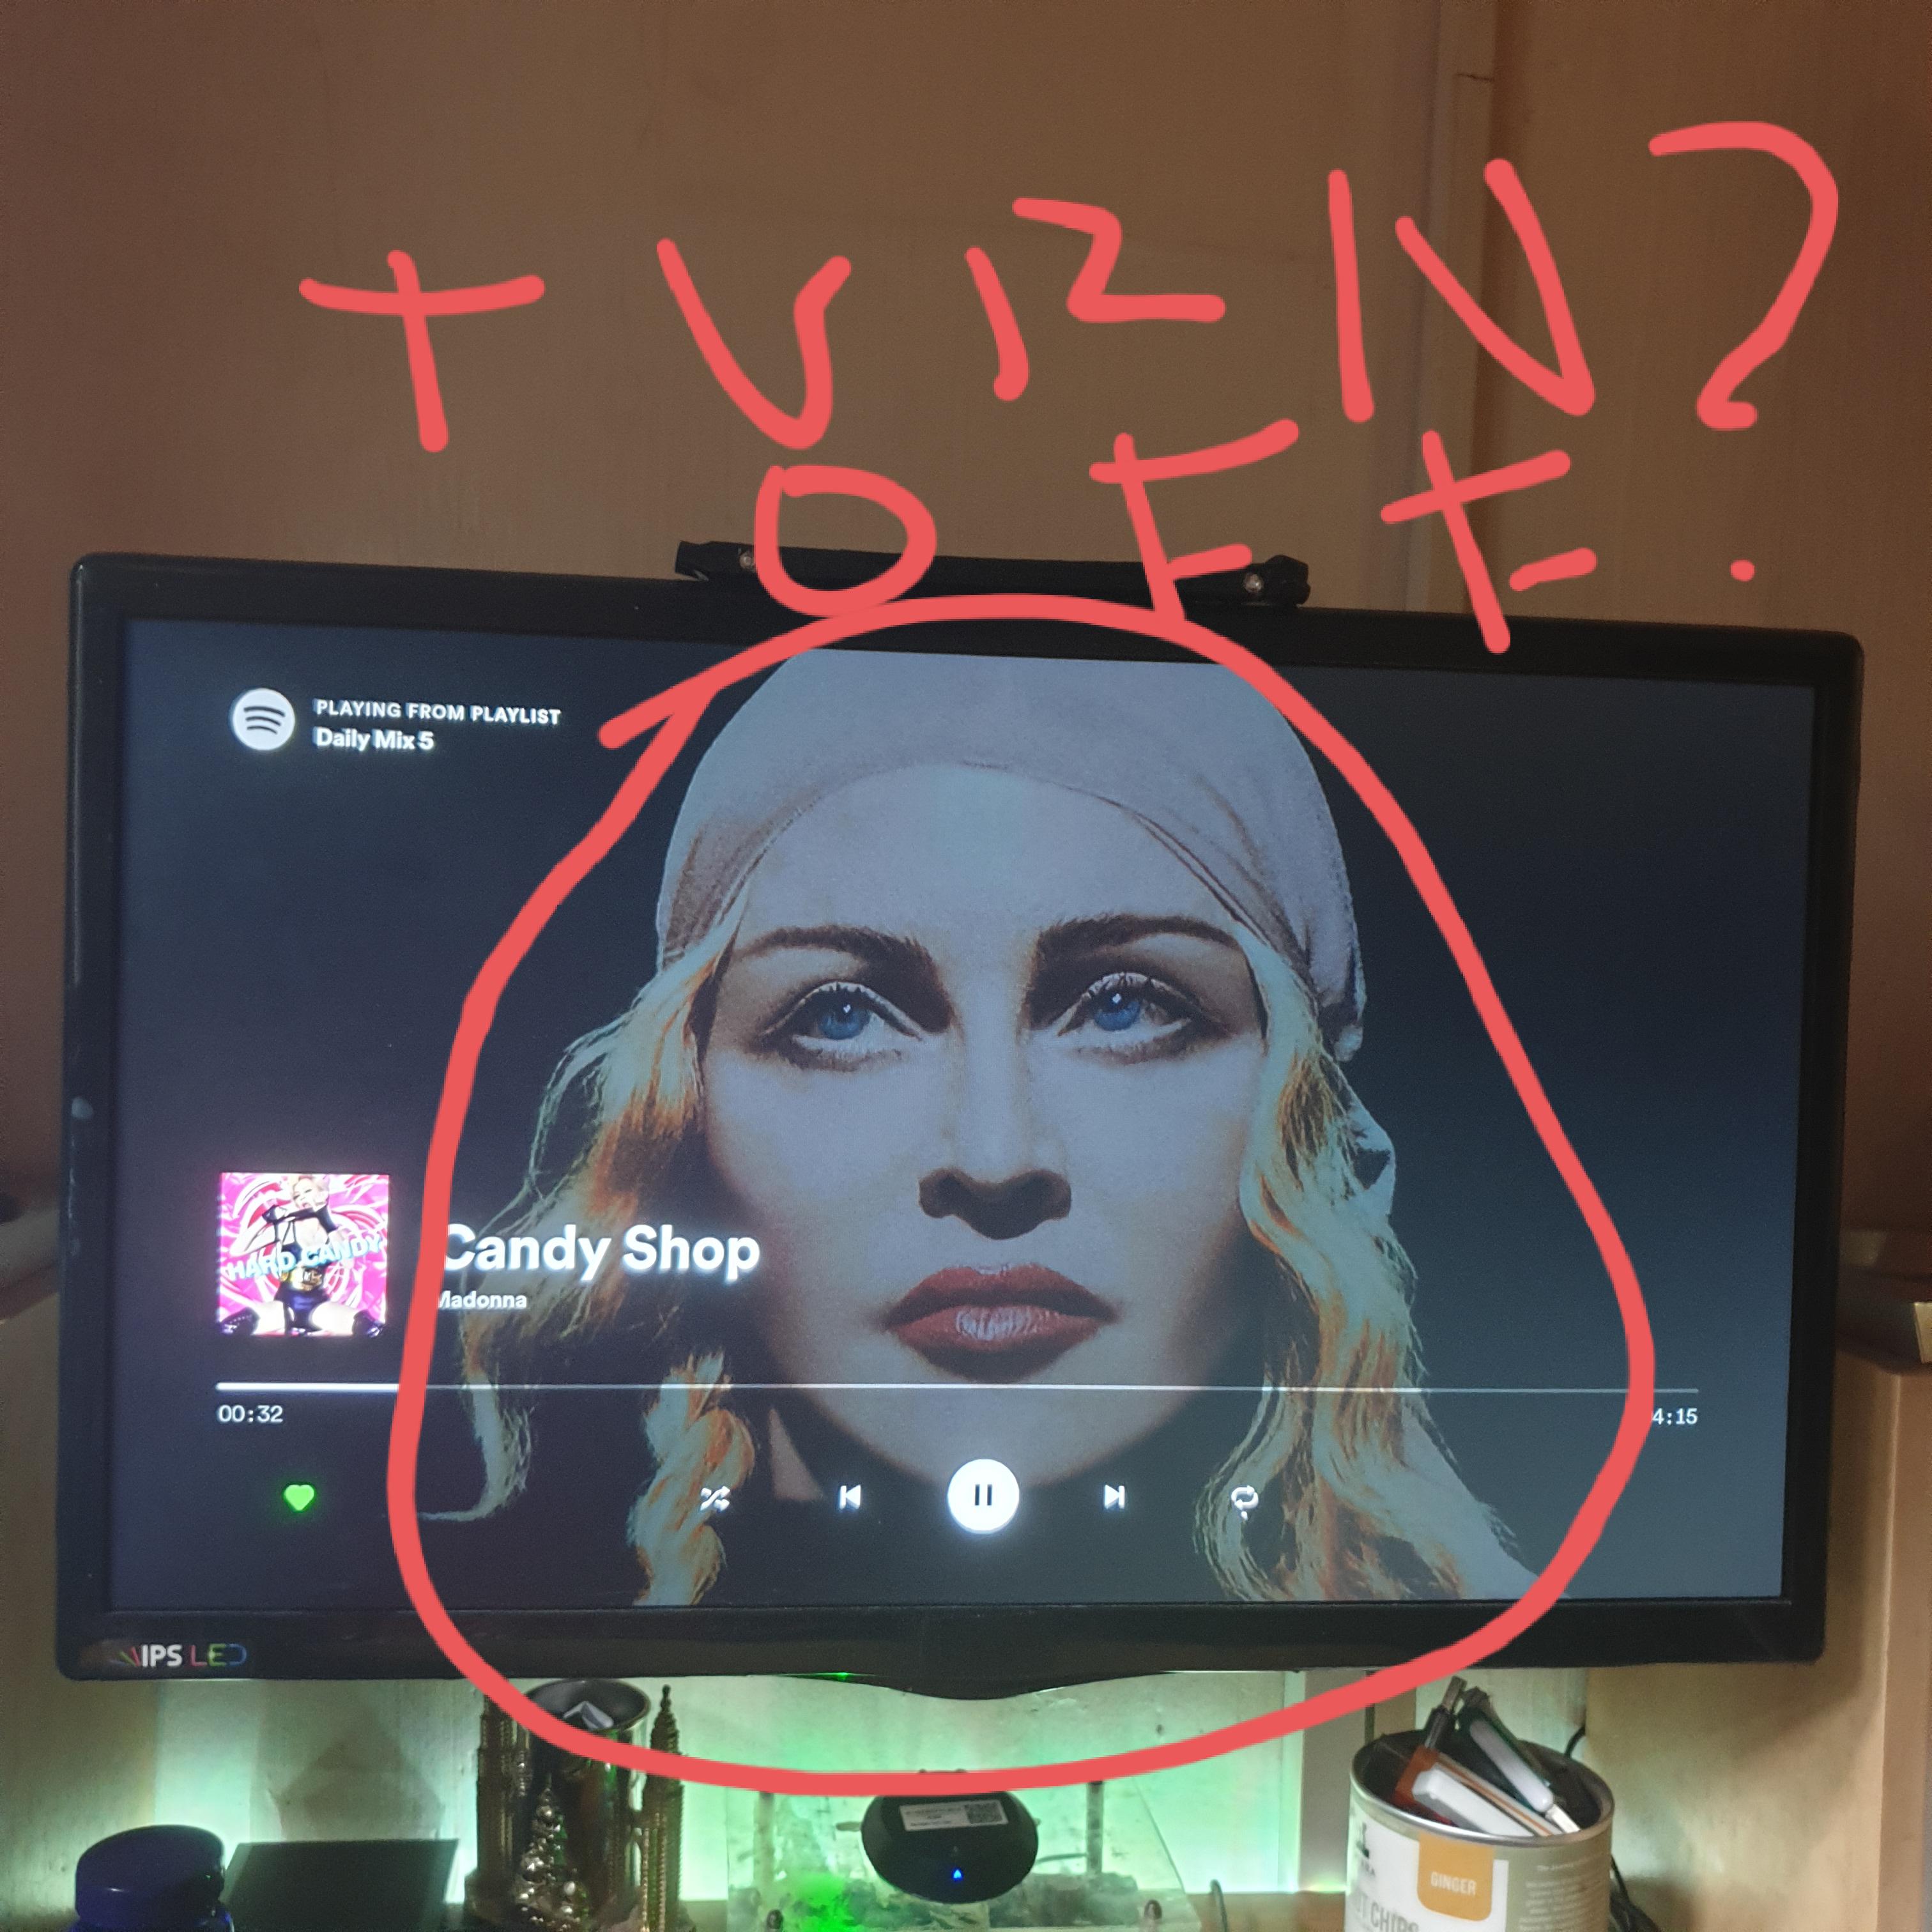 Please Tell Me How To Disable Spotify Background On Android Tv